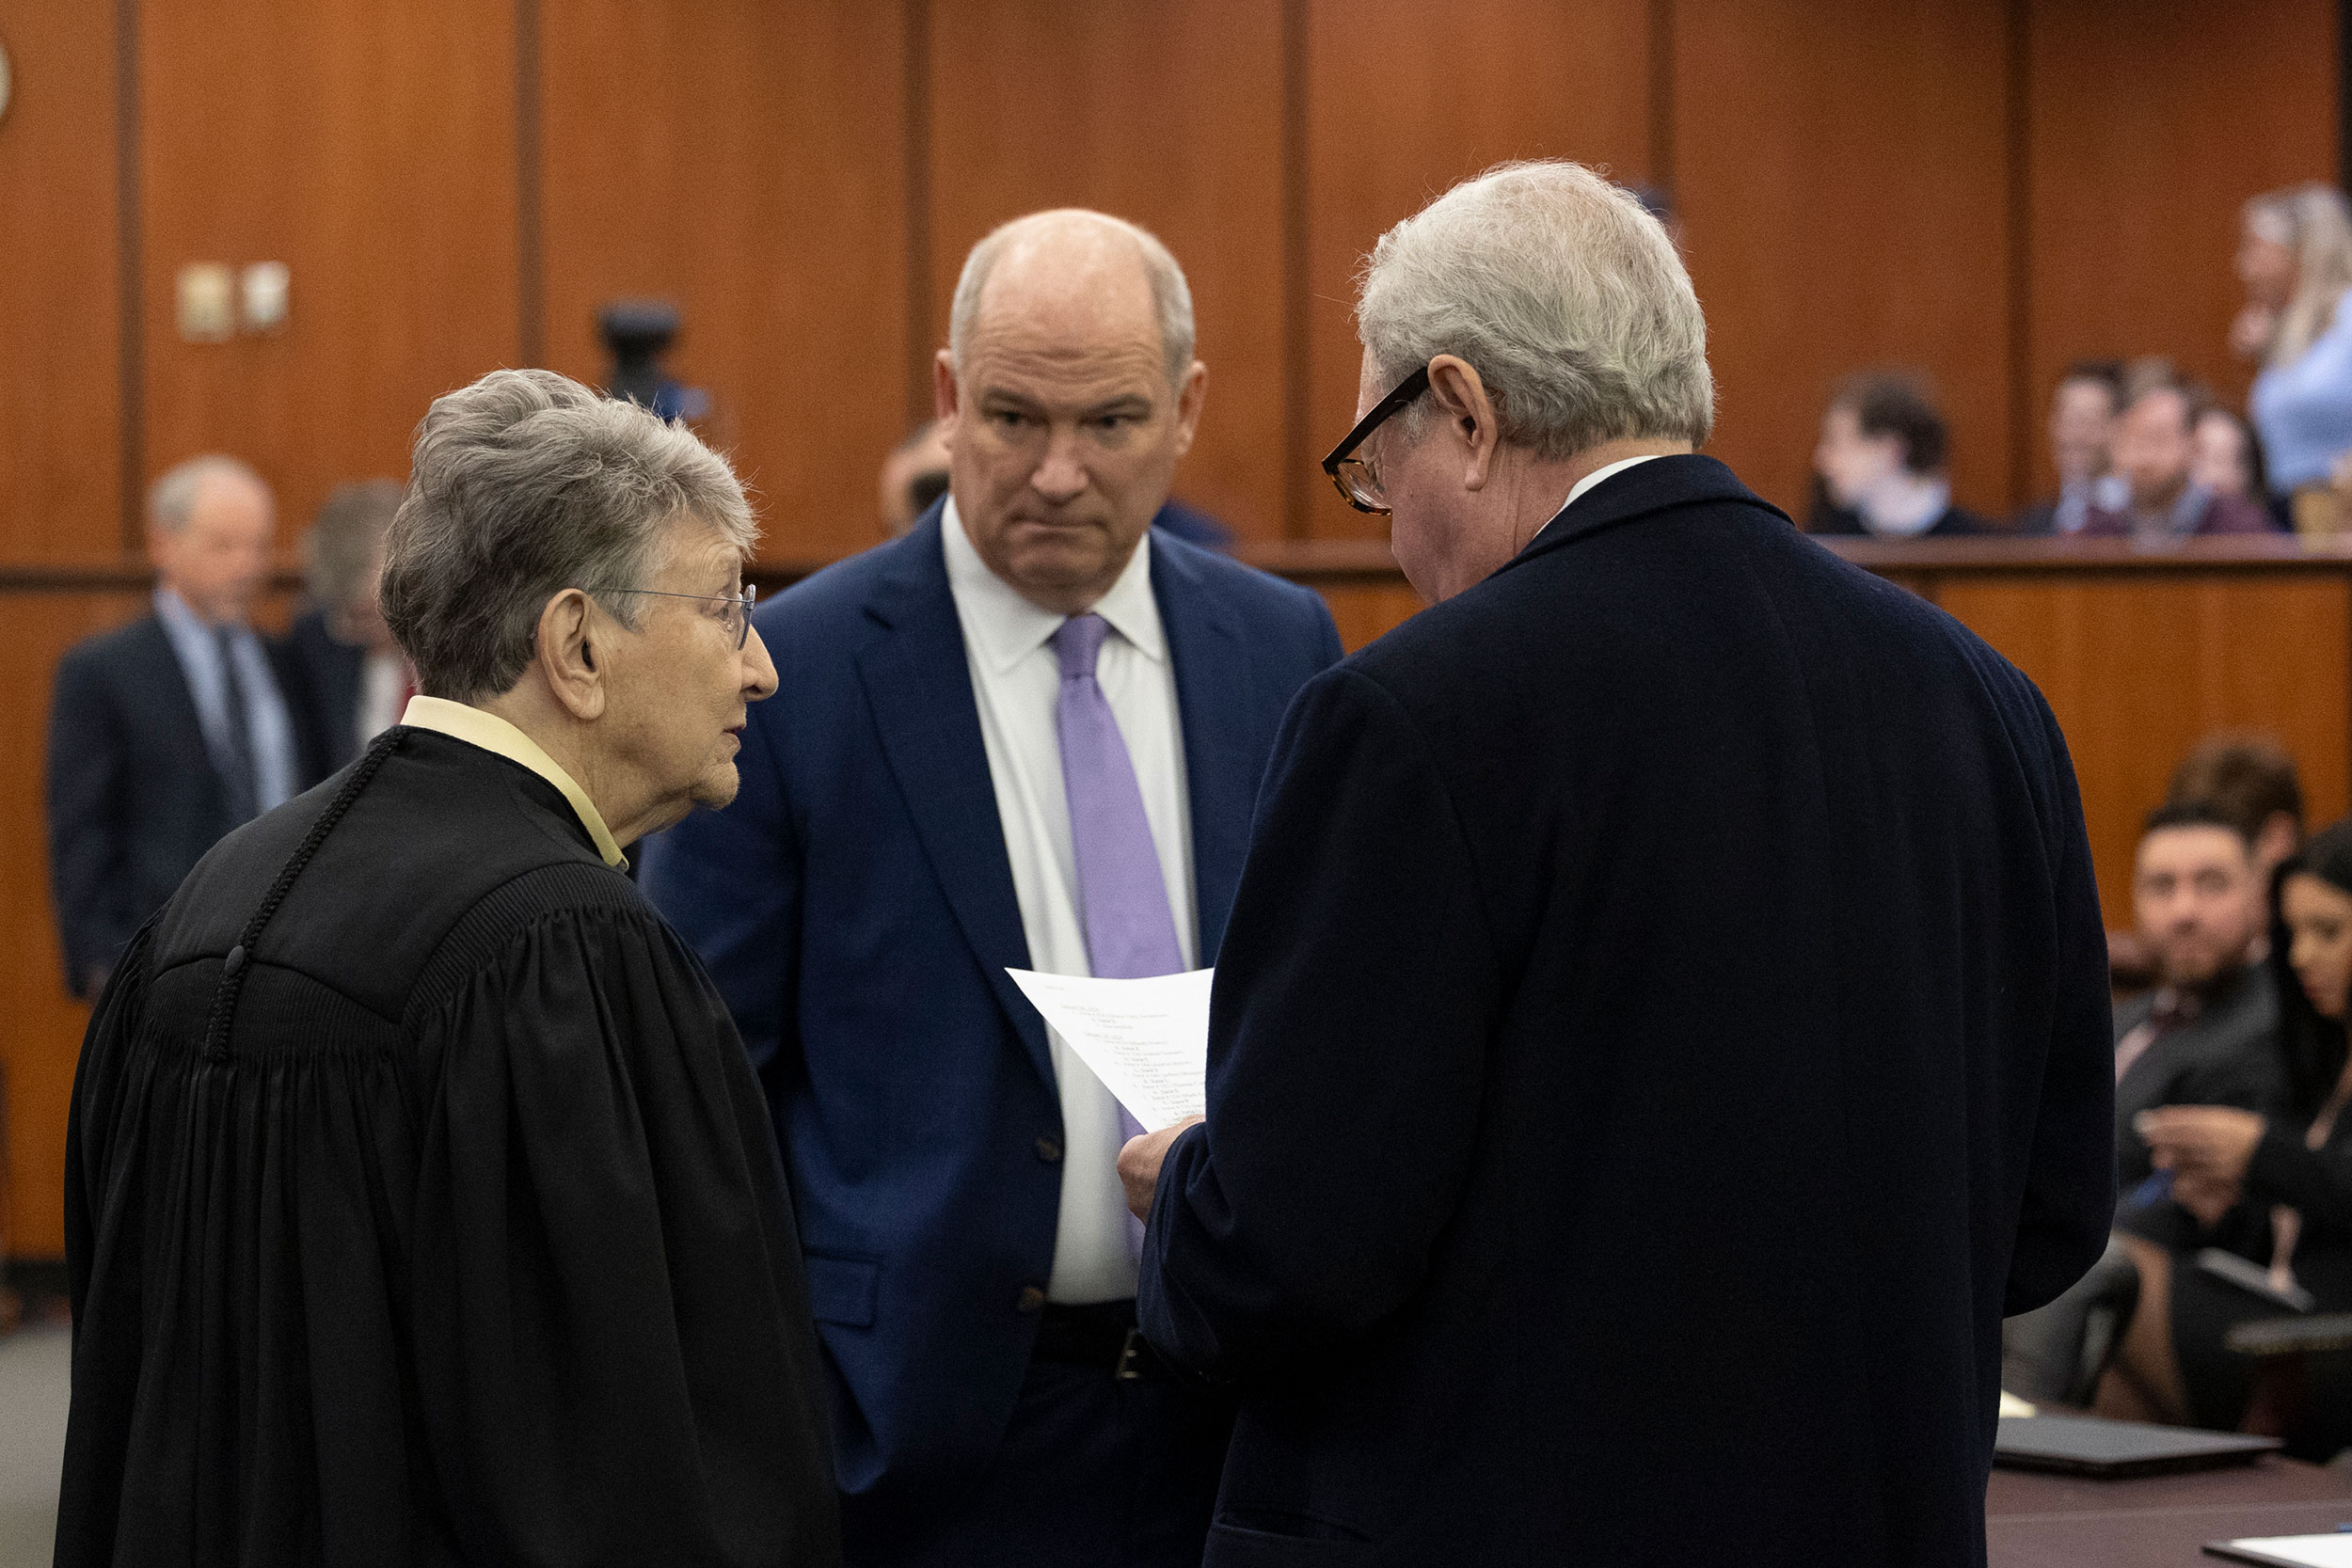 From left, Judge Jean Toal speaks with defense attorneys Jim Griffin and Dick Harpootlian before a judicial hearing at the Richland County Judicial Center in Columbia, South Carolina, on Monday.